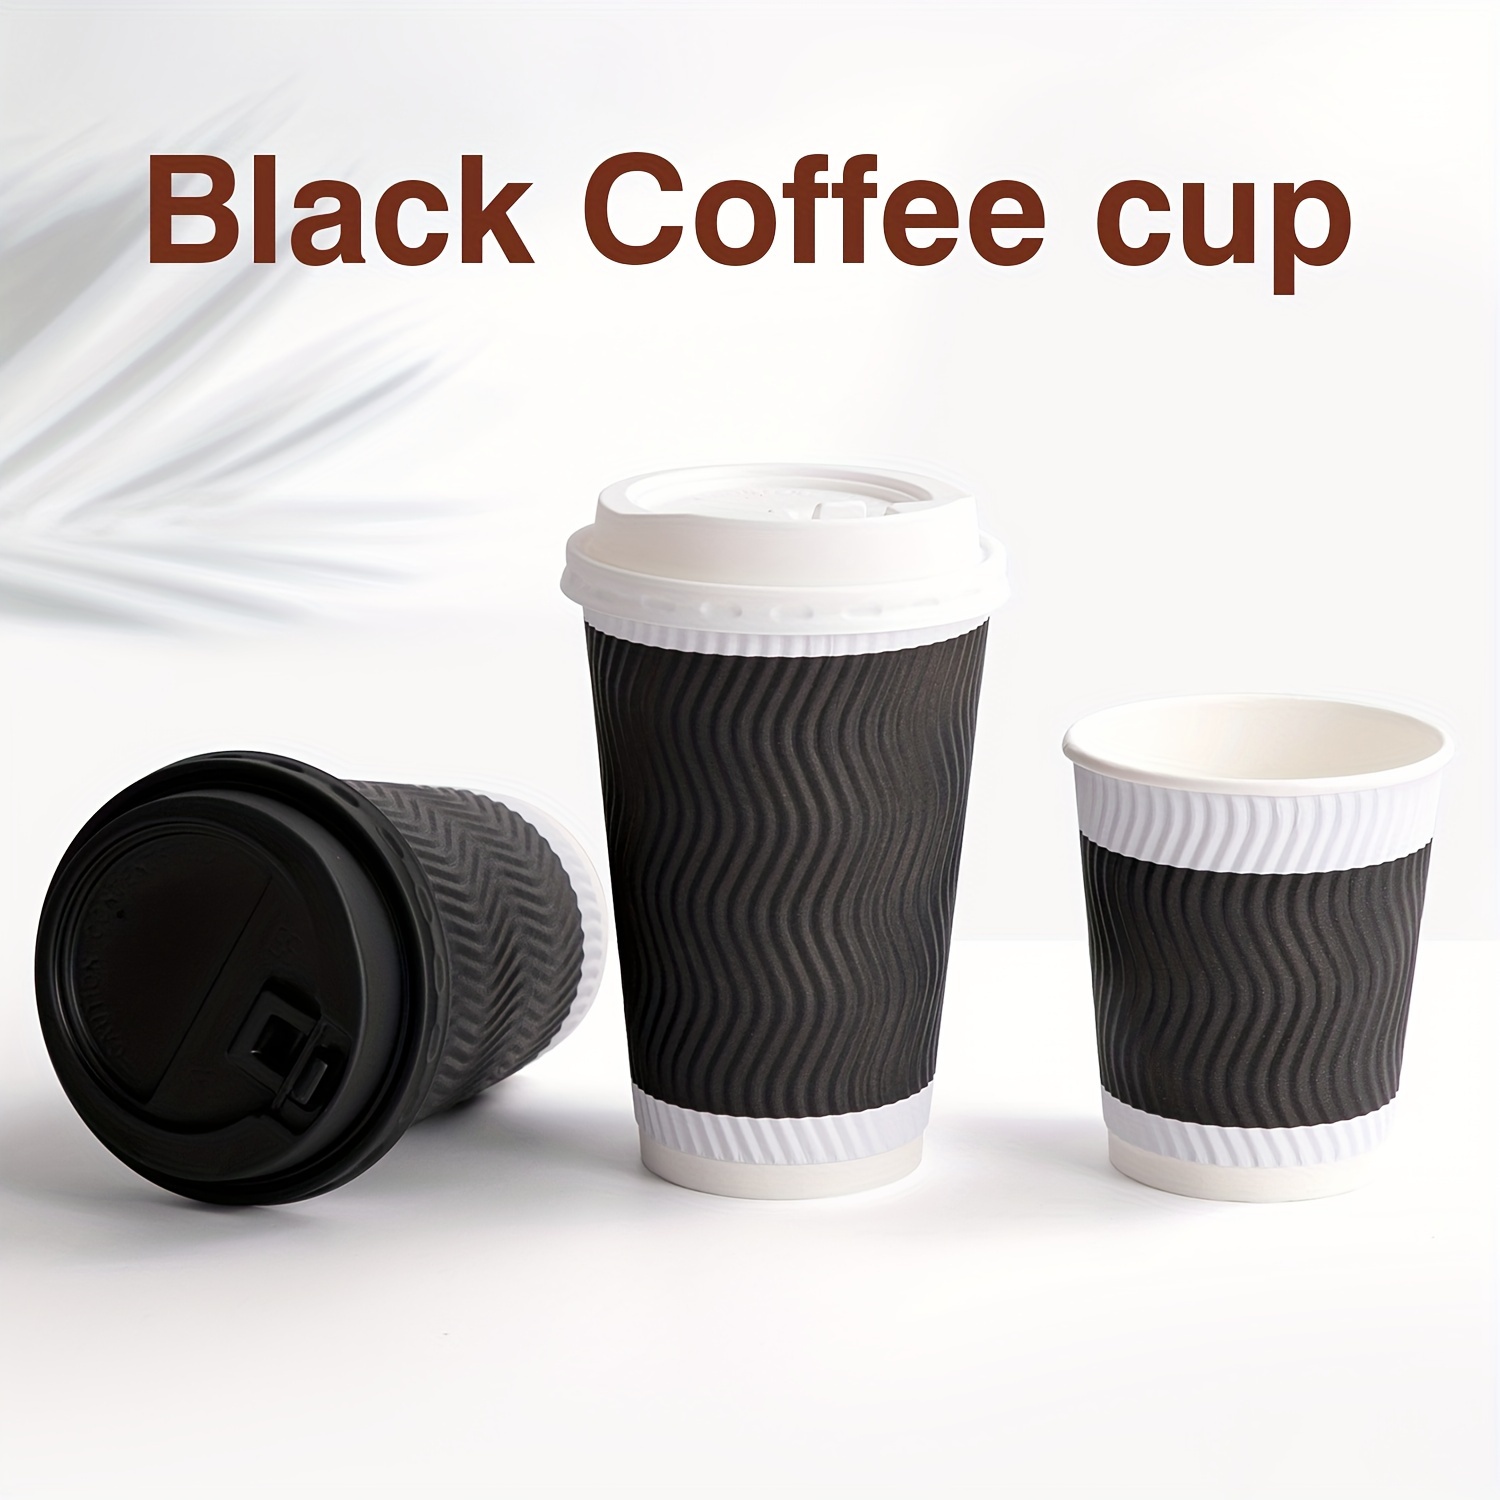 25 Pack] 16oz Disposable White Paper Coffee Cups with Black Dome Lids and  Protective Corrugated Cup Sleeves - Perfect Disposable Travel Mug for Home,  Office, Coffee Shop, Travel, Tea 